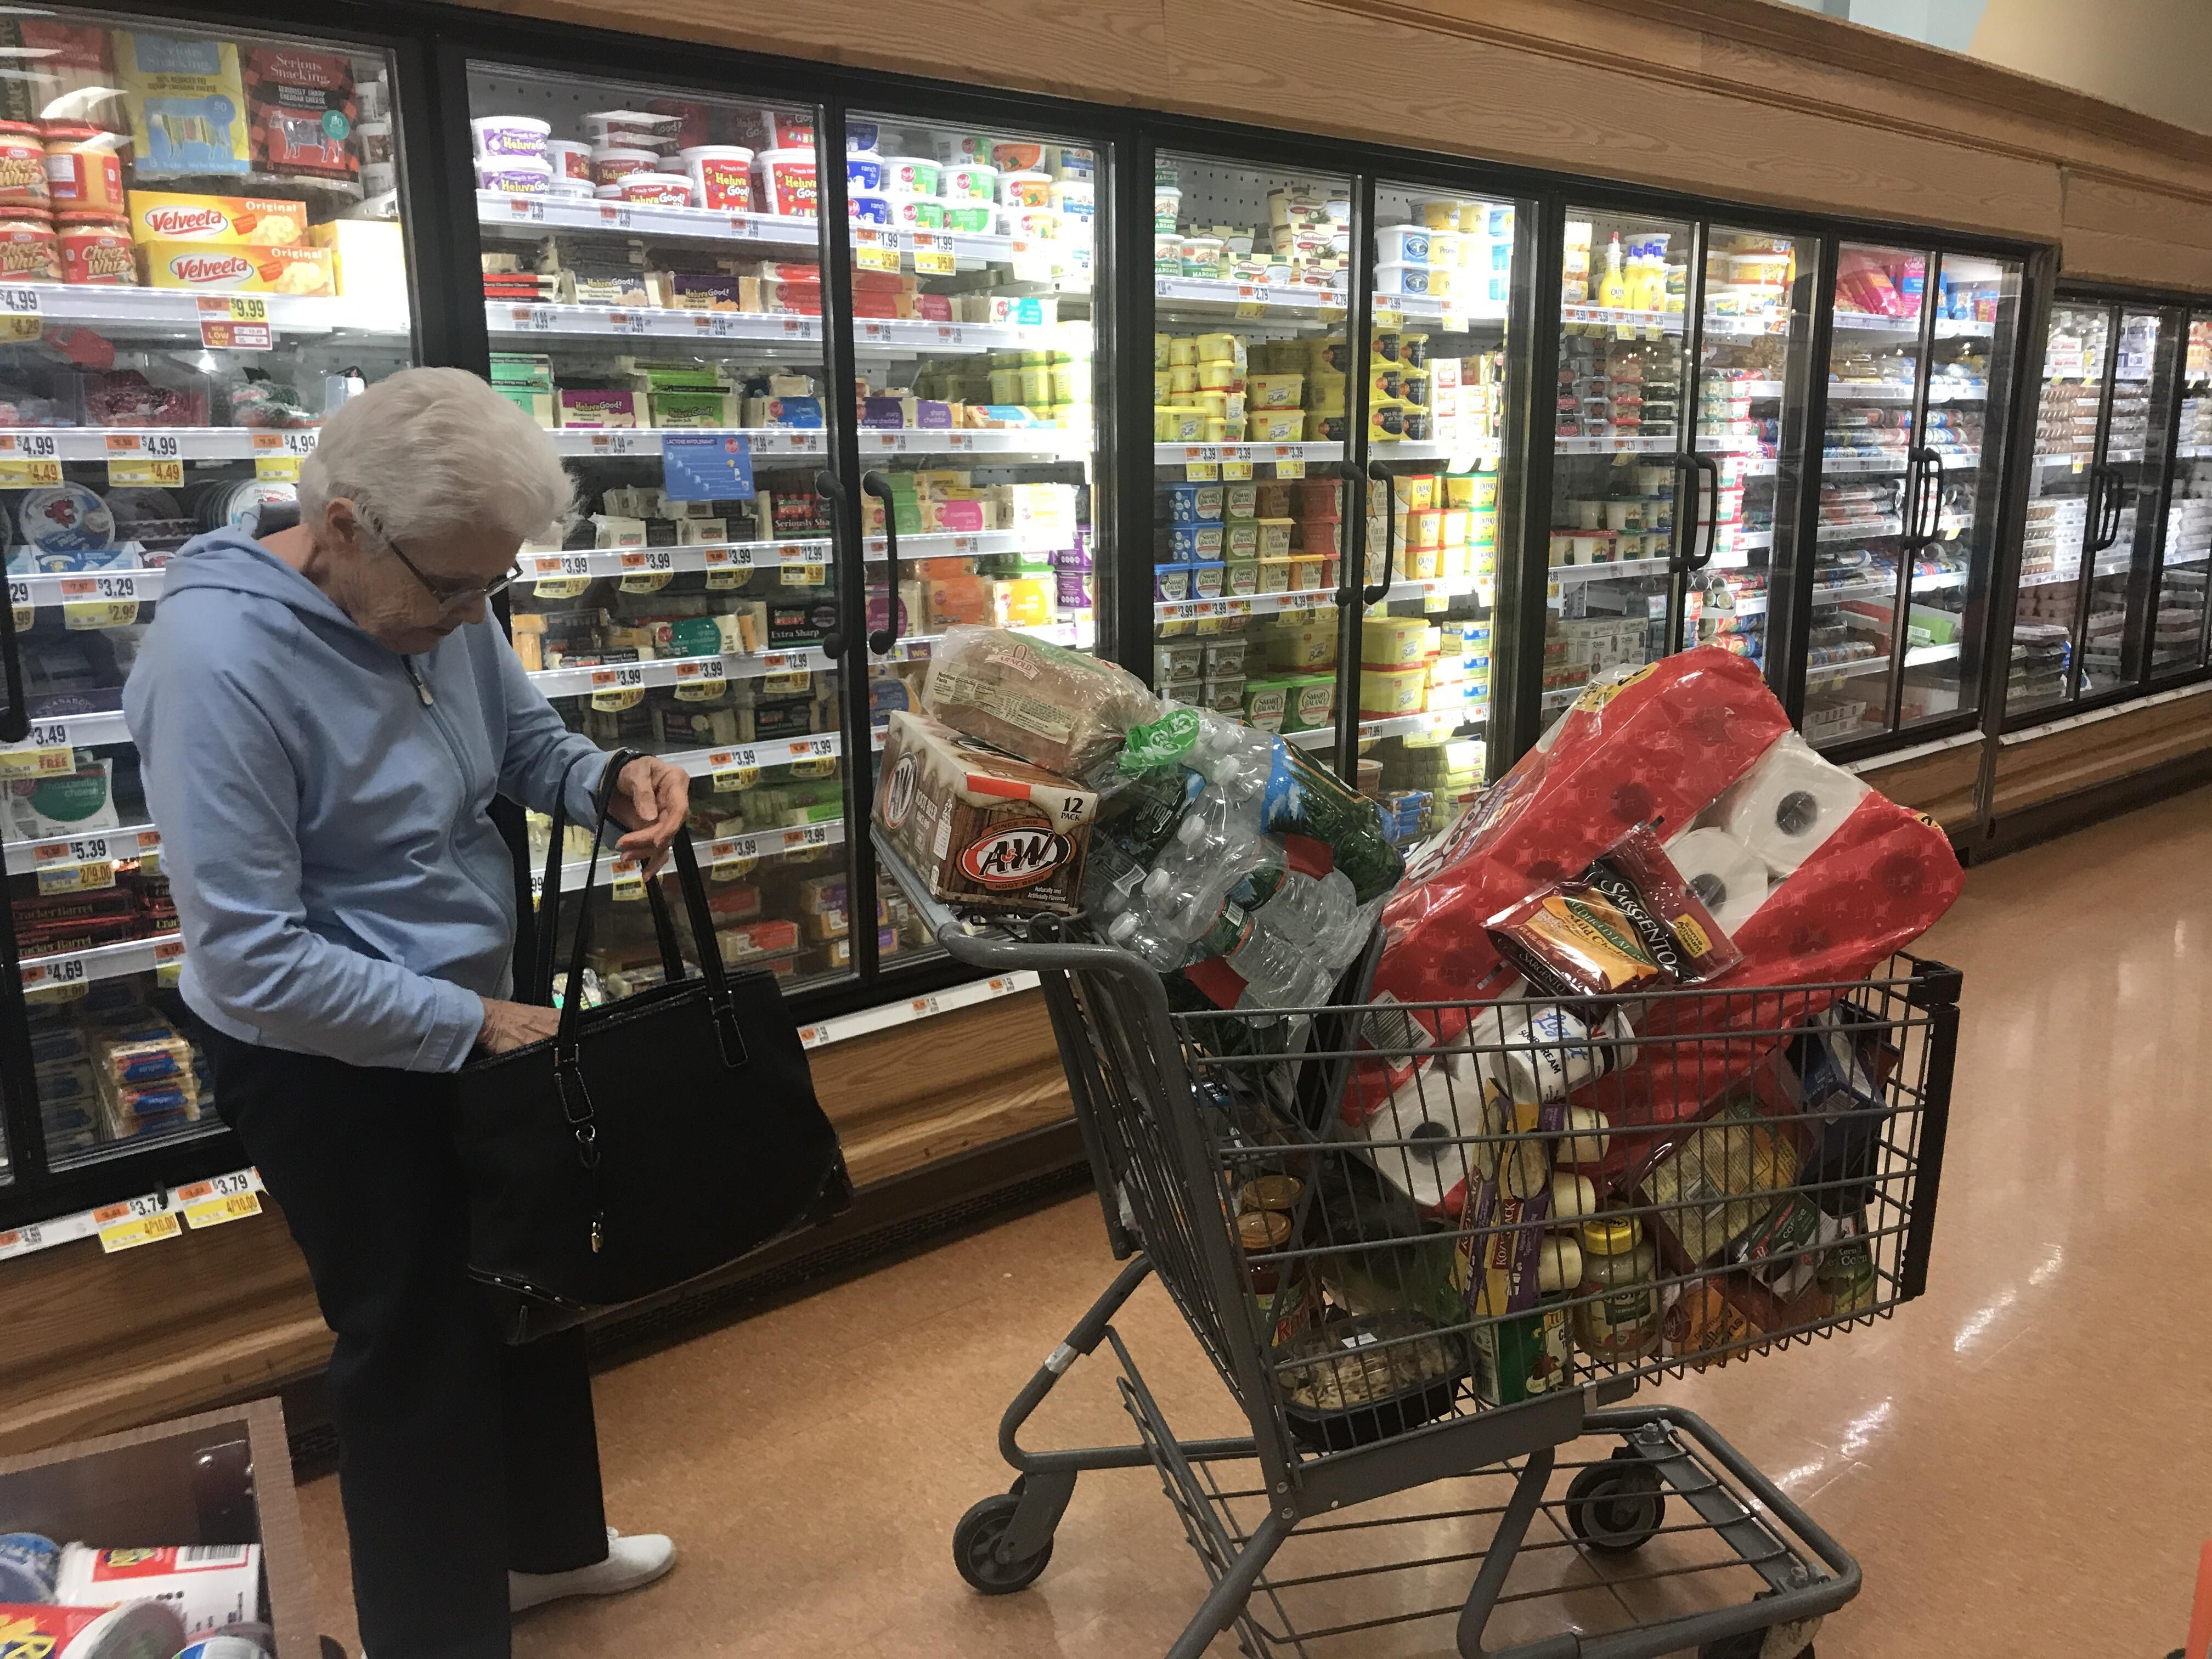 My 84 yr old Mom asked me to bring her shopping and said " I only have a couple things to get "